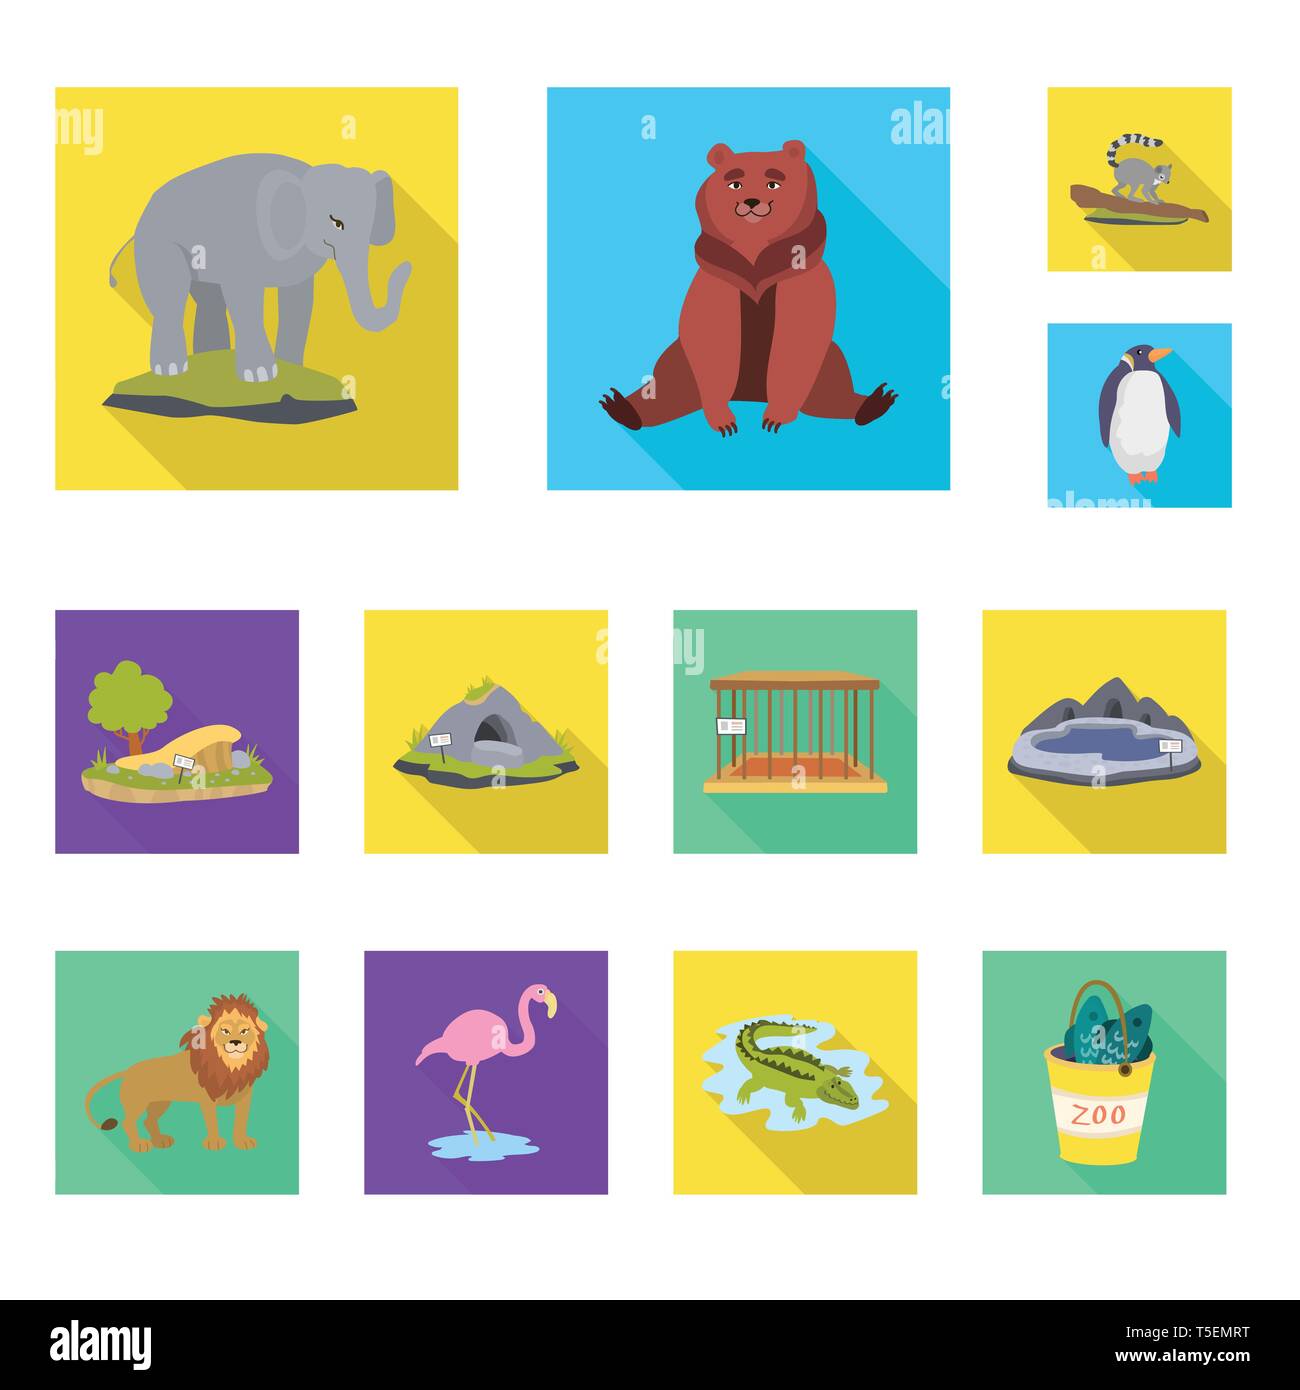 elephant,bear,lemur,penguin,trees,cave,cell,lake,lion,flamingo,crocodile,bucket,cute,brown,monkey,white,sand,empty,pool,pink,alligator,fish,huge,predator,exotic,ice,leaves,mountain,safari,animal,nature,fun,fauna,entertainment,zoo,park,forest,flora,set,vector,icon,illustration,isolated,collection,design,element,graphic,sign,flat,shadow Vector Vectors , Stock Vector